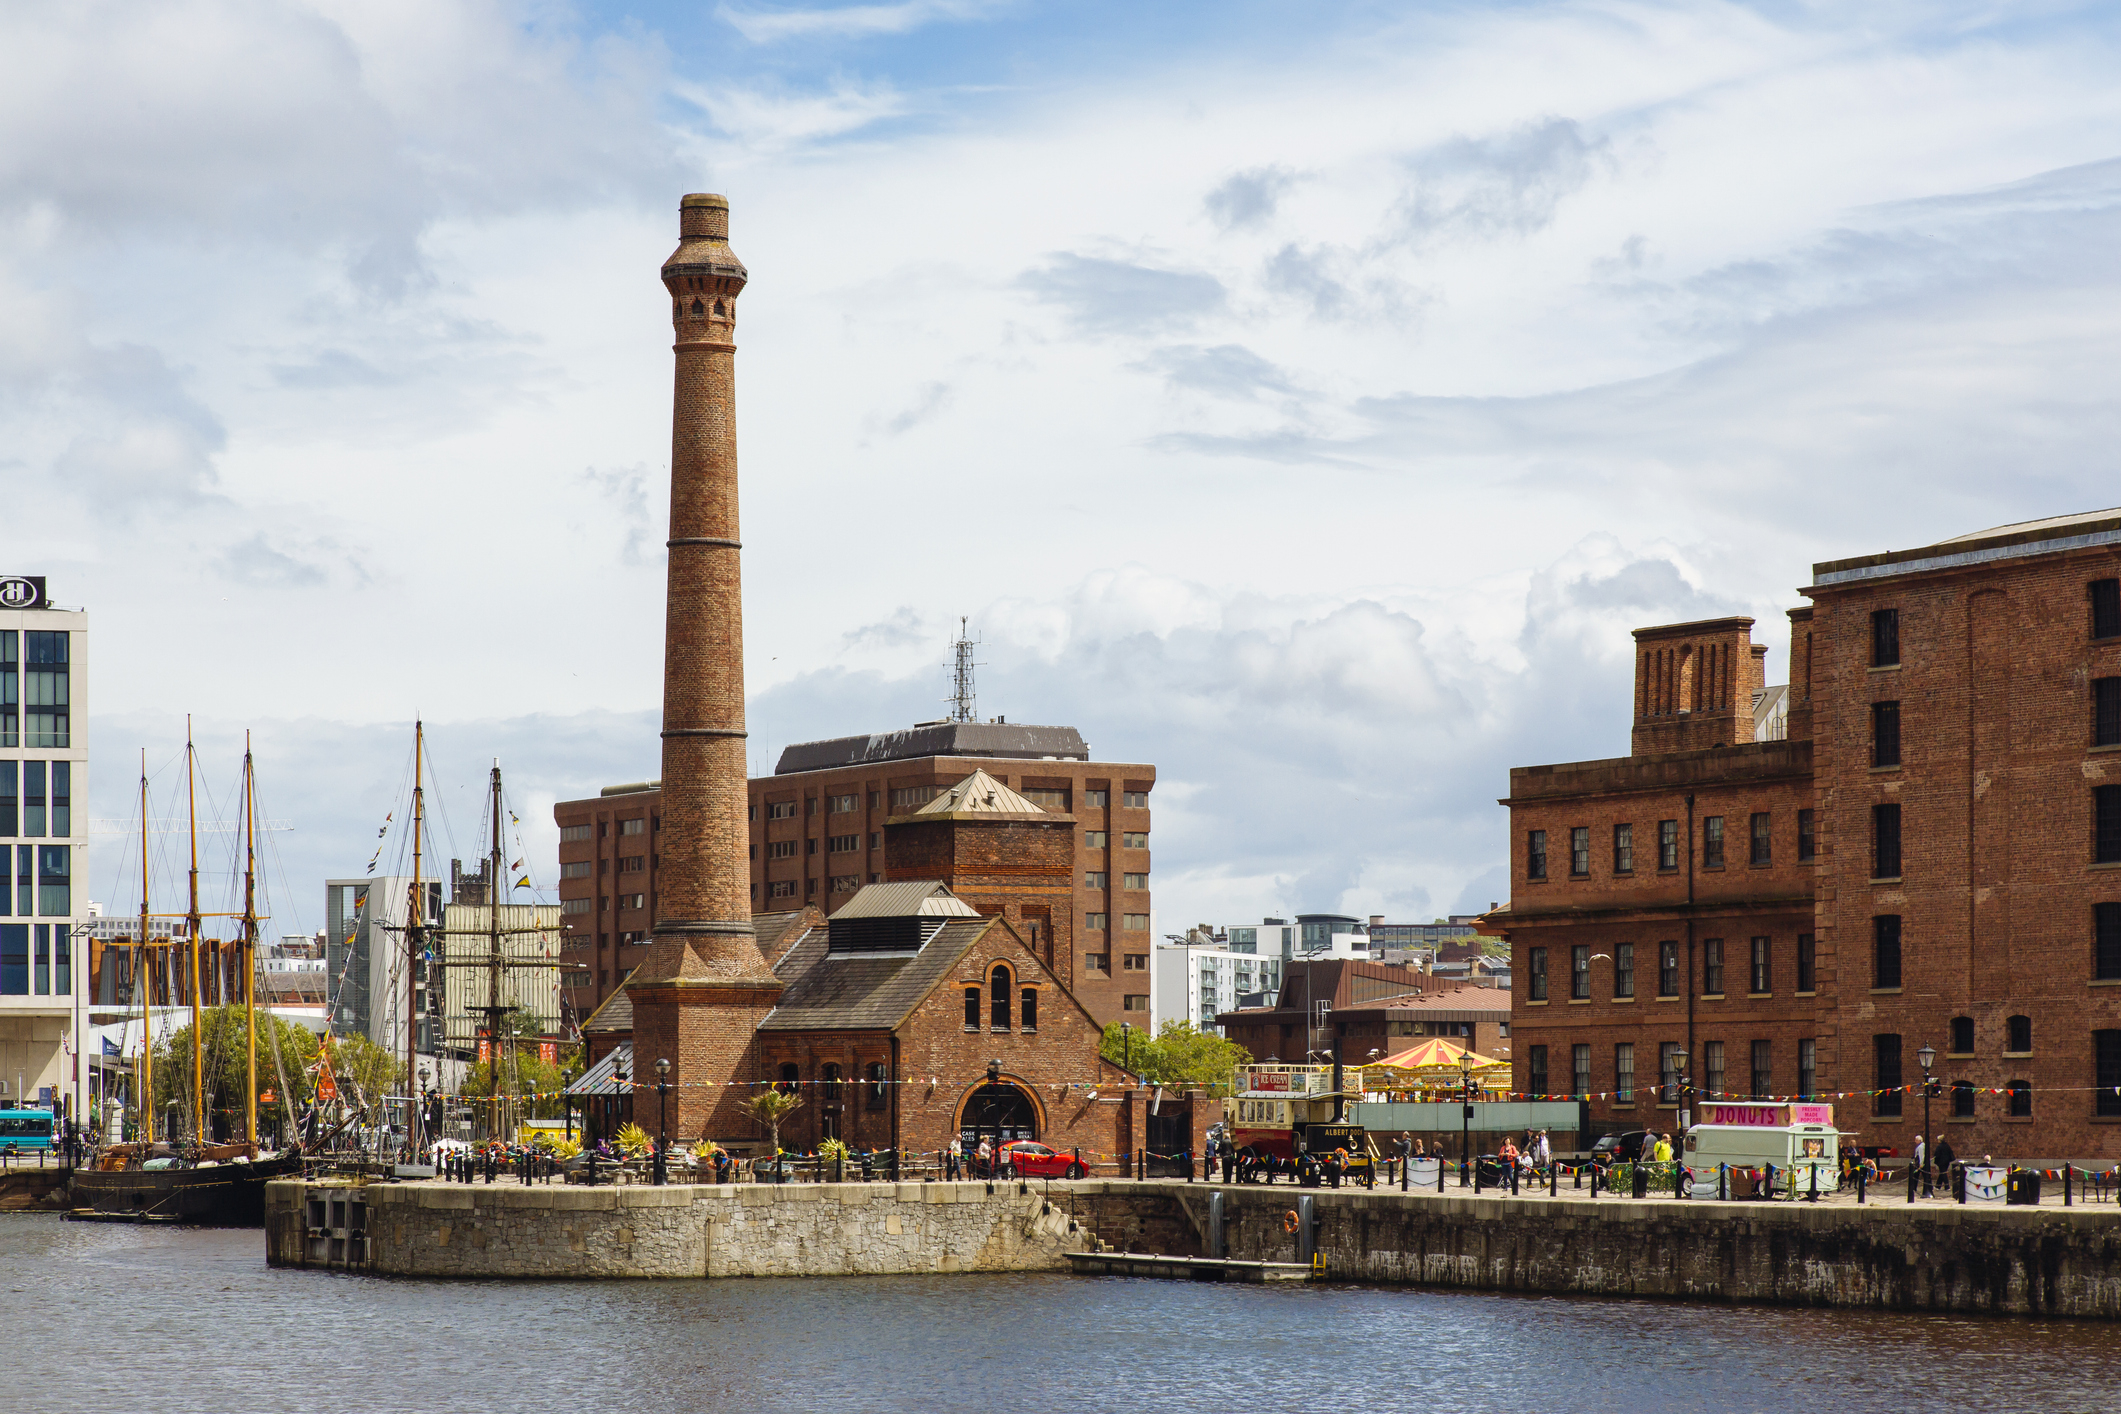 Historic waterfront buildings with a prominent chimney tower near a dock with boats